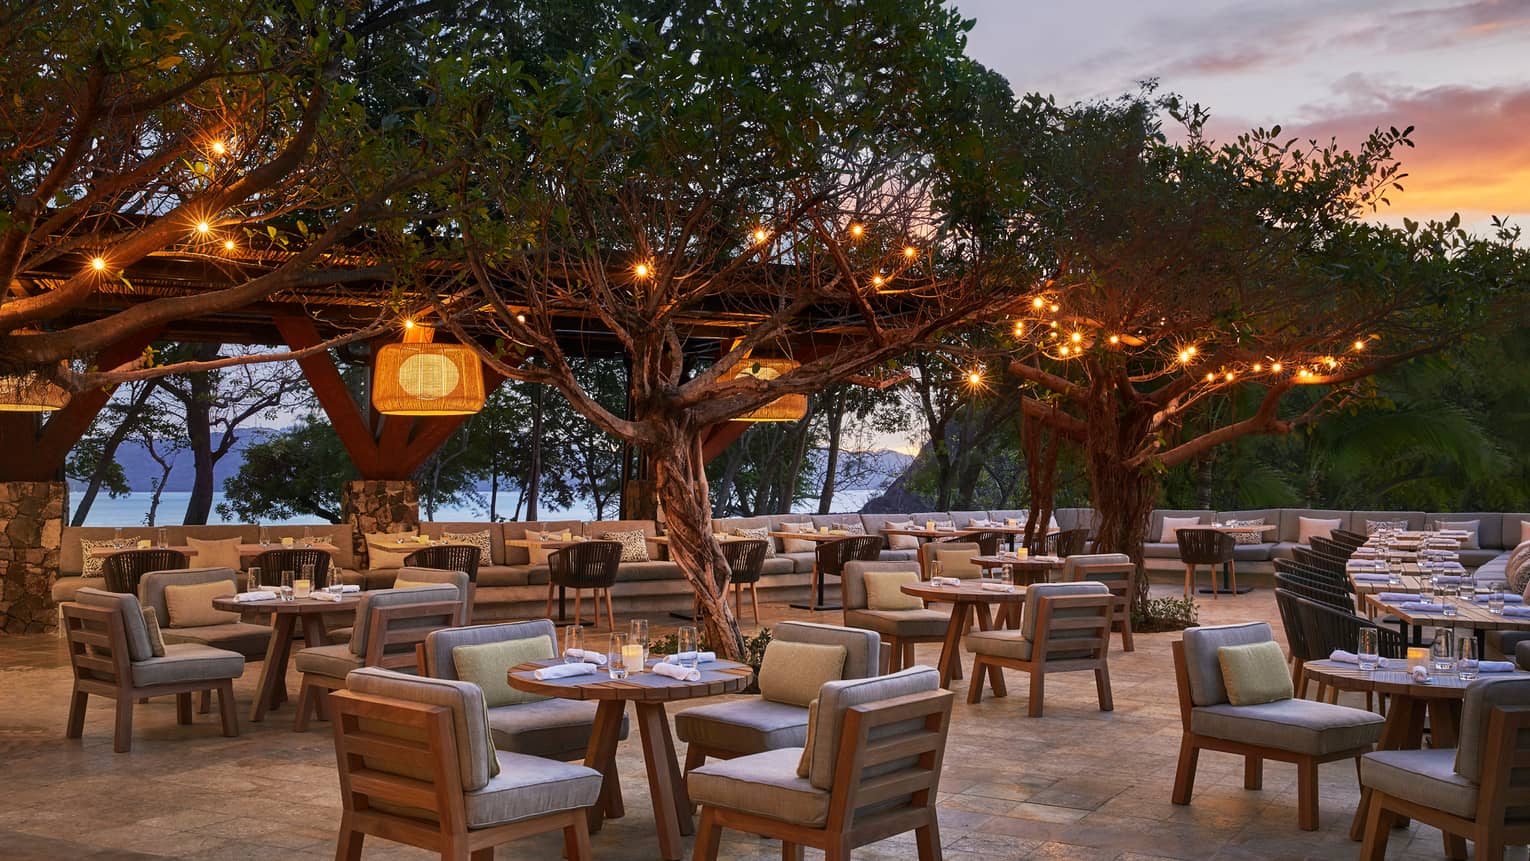 Patio tables, chairs with plush cushions on patio under trees with hanging lights, at sunset